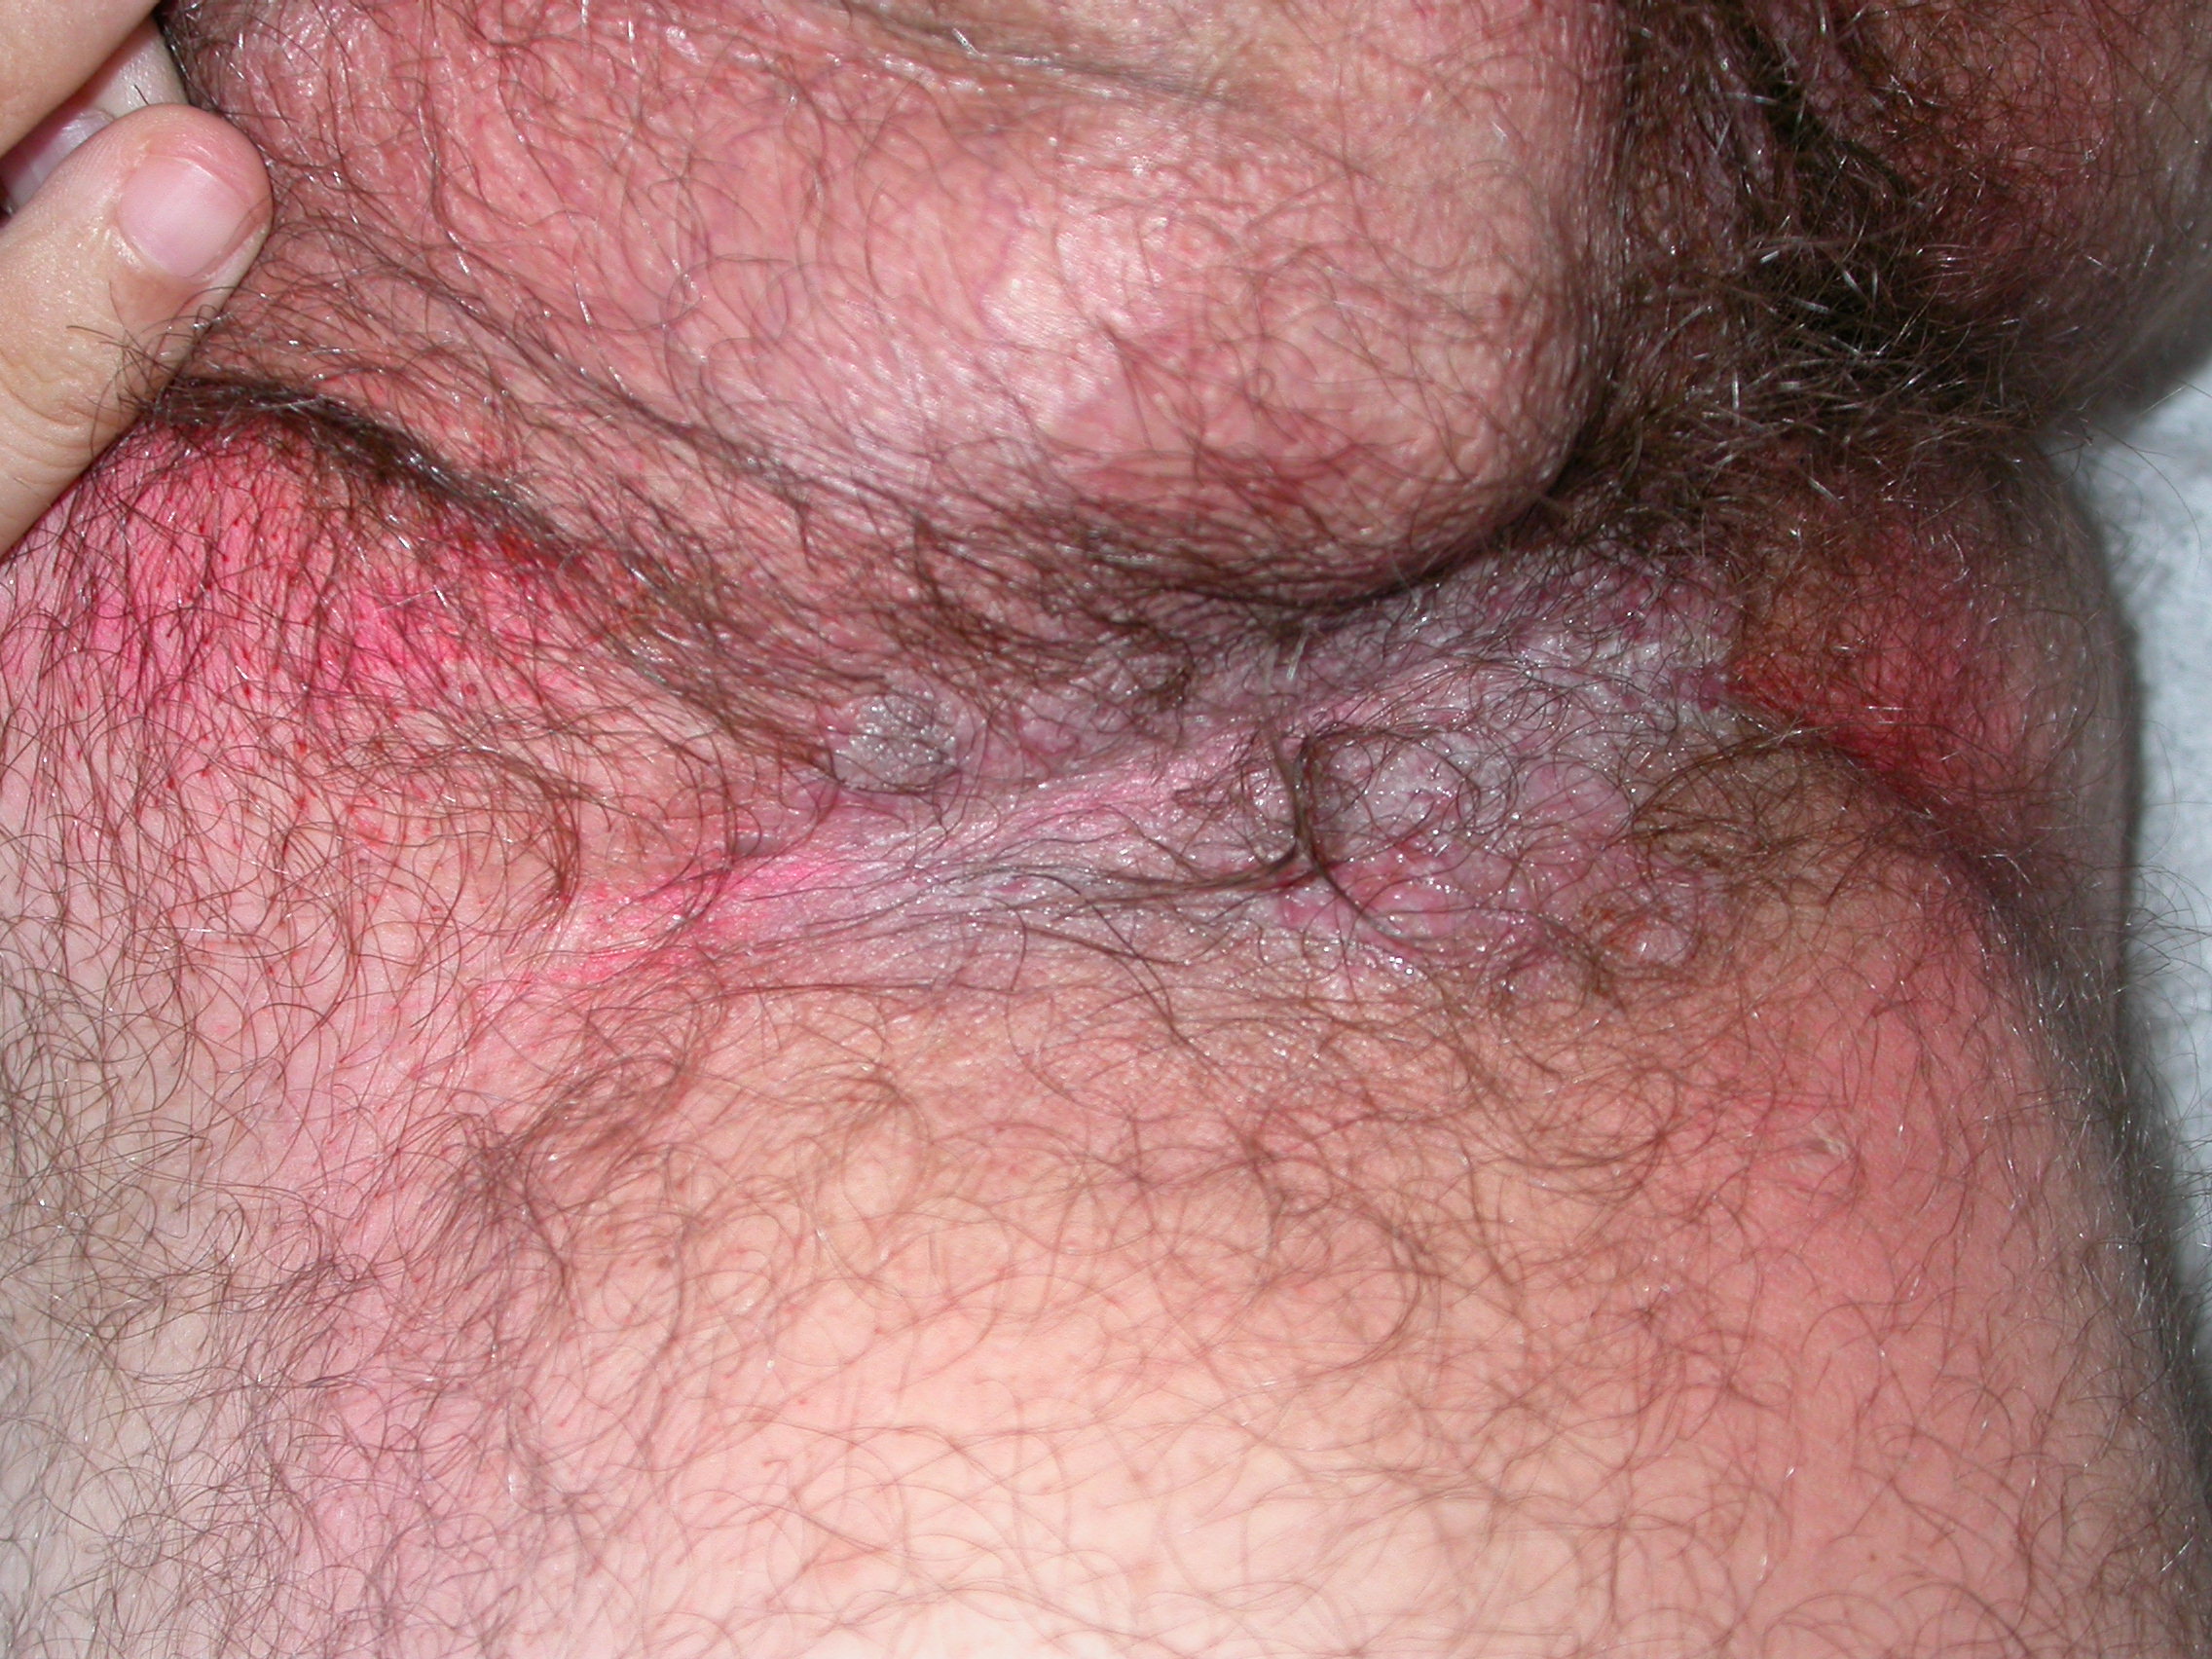 Erythematous macerated plaques with crusted erosions of the right inguinal fold